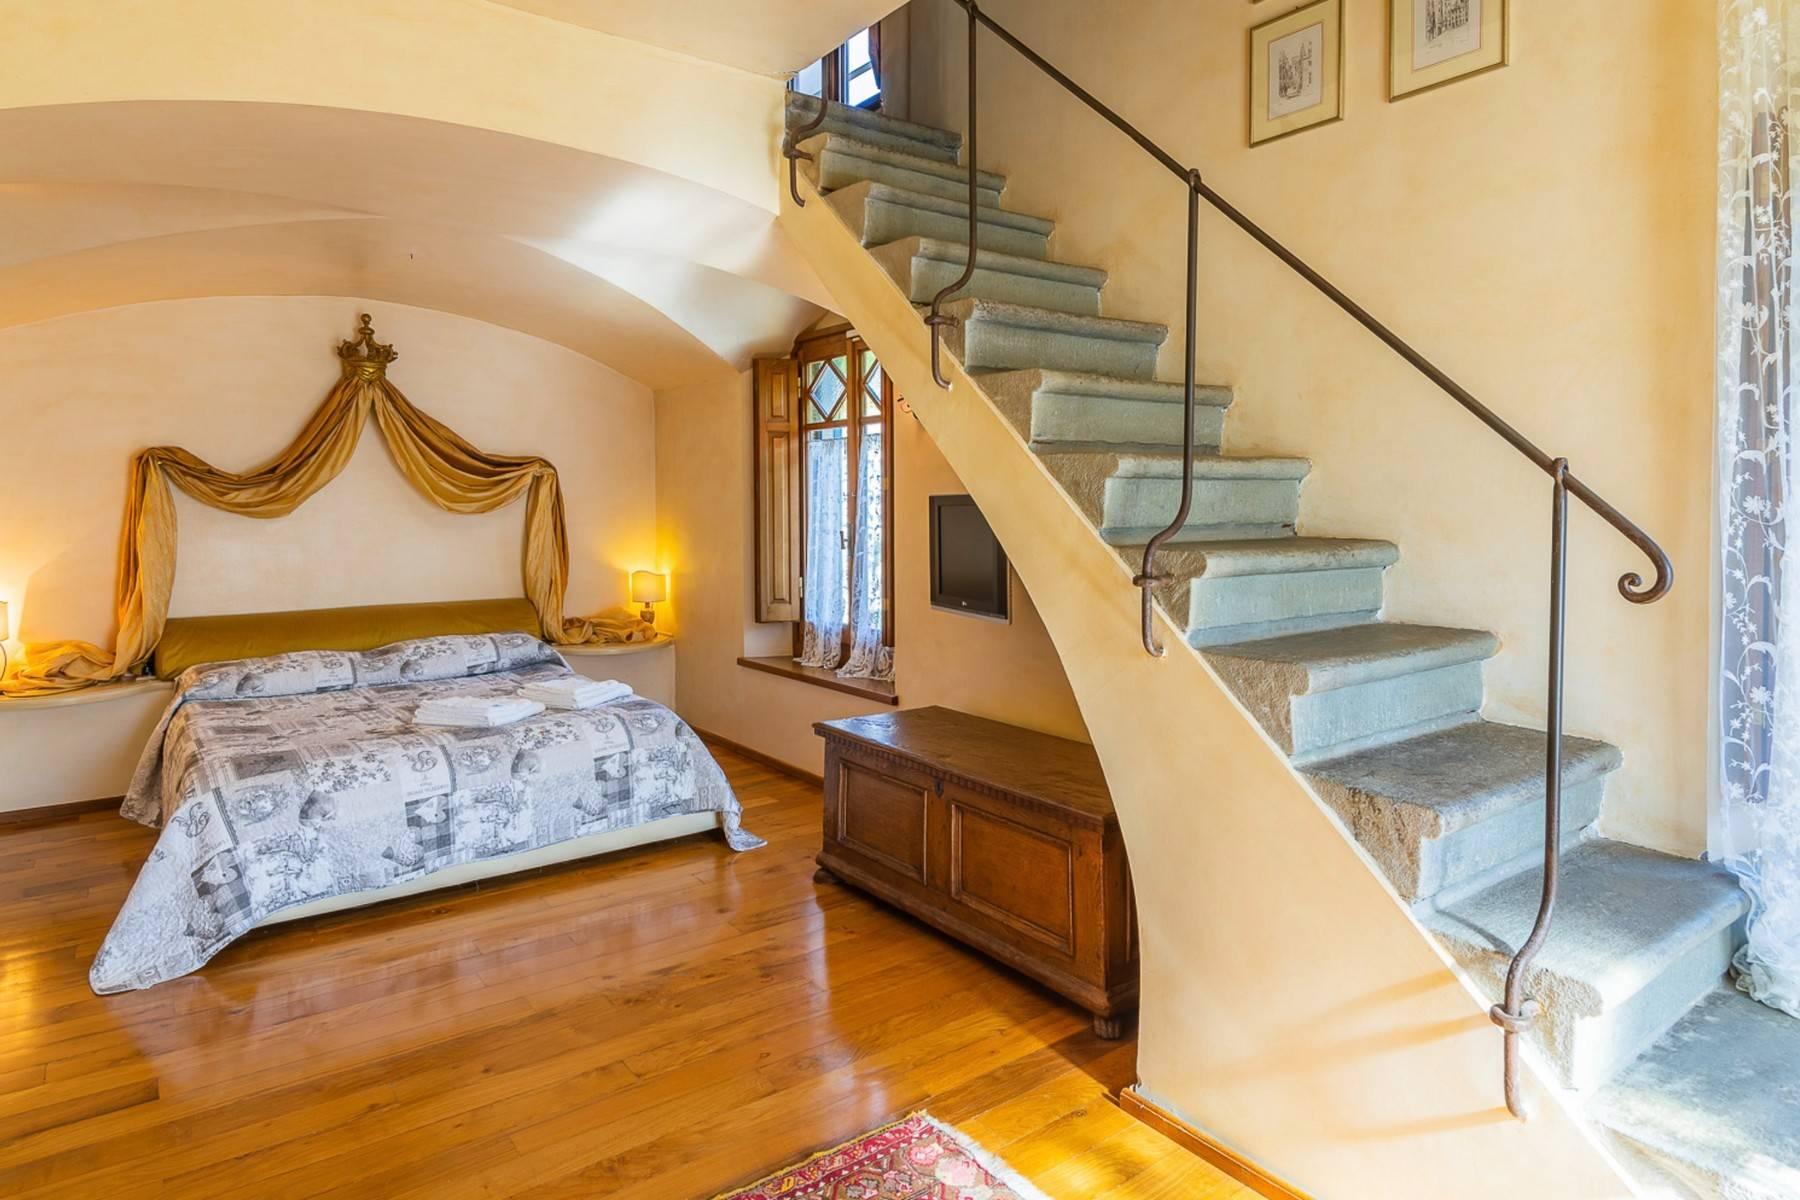 Majestic Luxury Villa with outbuildings on the hills south of Lucca - 10